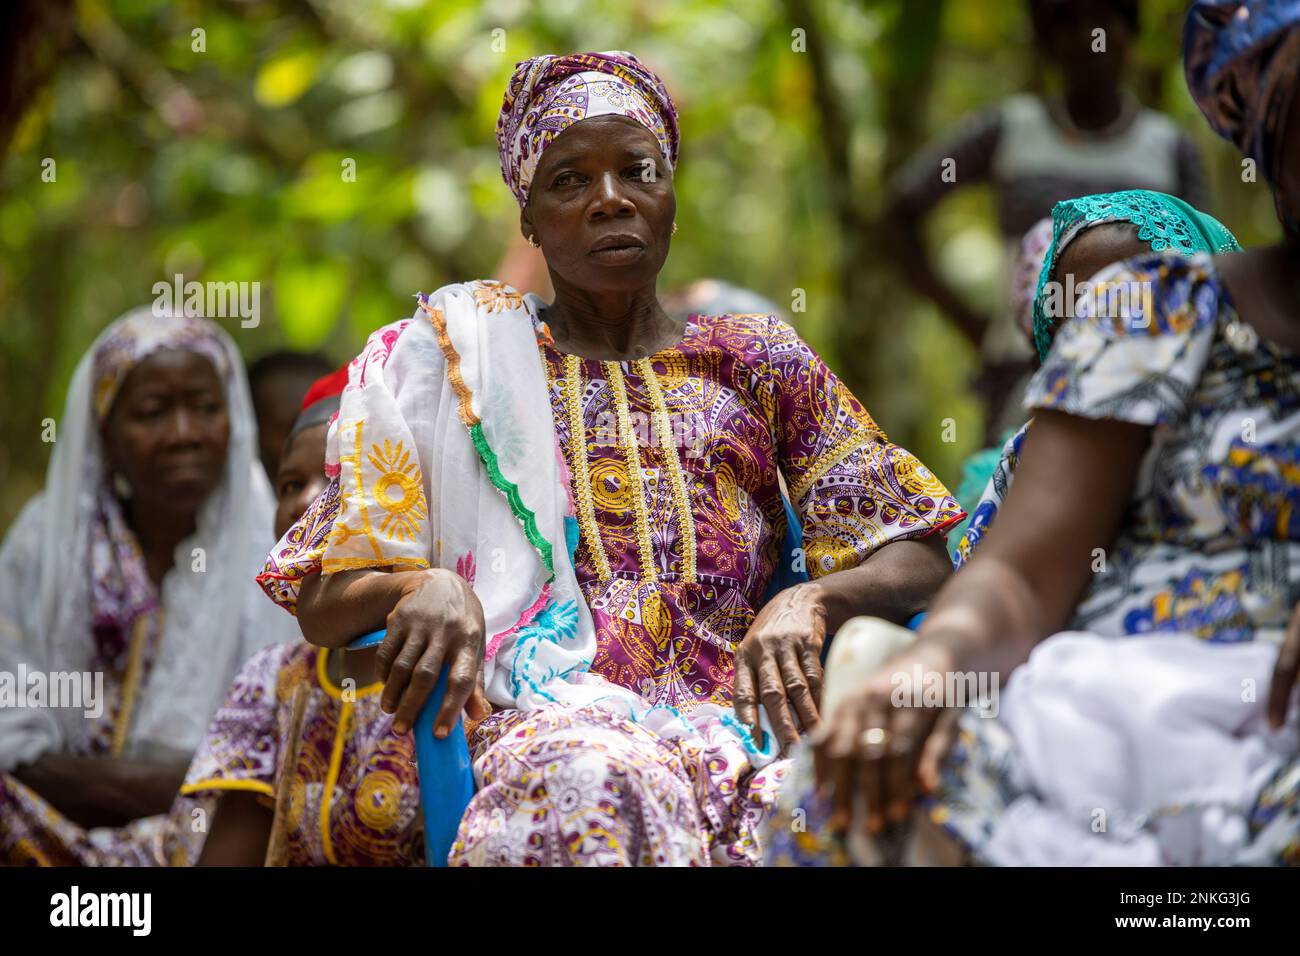 Agboville, Ivory Coast. 23rd Feb, 2023. Harvest workers sit on a cocoa plantation. Federal Minister of Labor Heil and Federal Minister for Economic Cooperation and Development Schulze visit Ghana and Côte d'Ivoire. Credit: Christophe Gateau/dpa/Alamy Live News Stock Photo